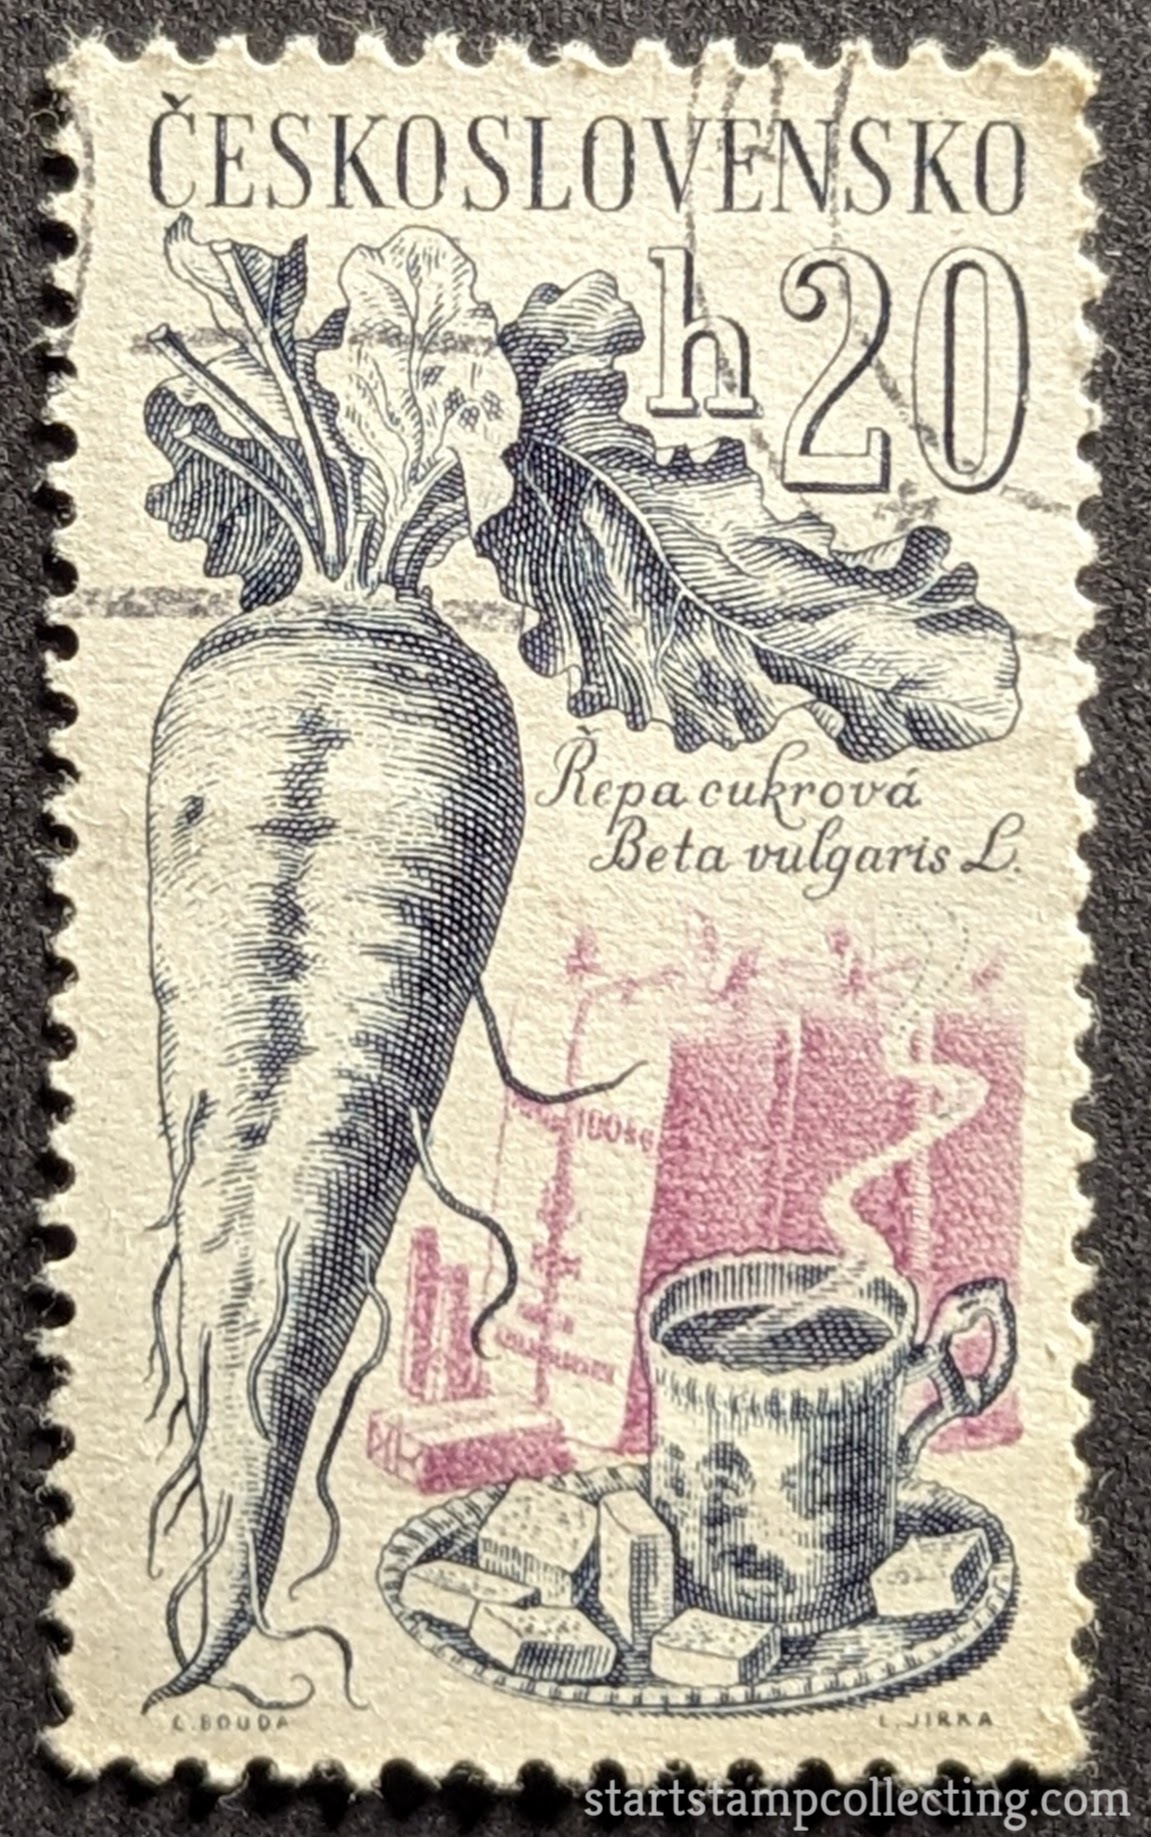 Sugar Beet, Cup and Saucer 1961 Czechoslovakia Stamp